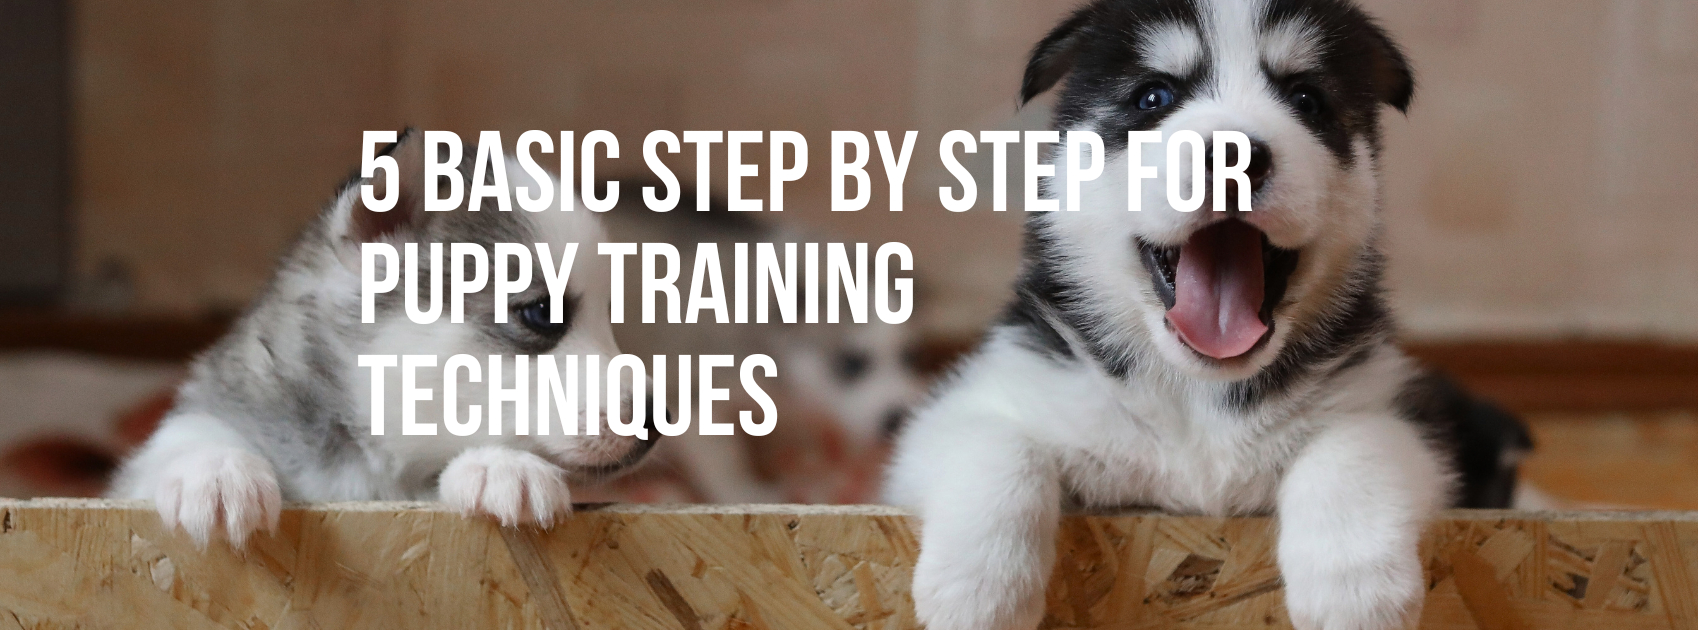 5 BASIC STEP BY STEP FOR PUPPY TRAINING TECHNIQUES